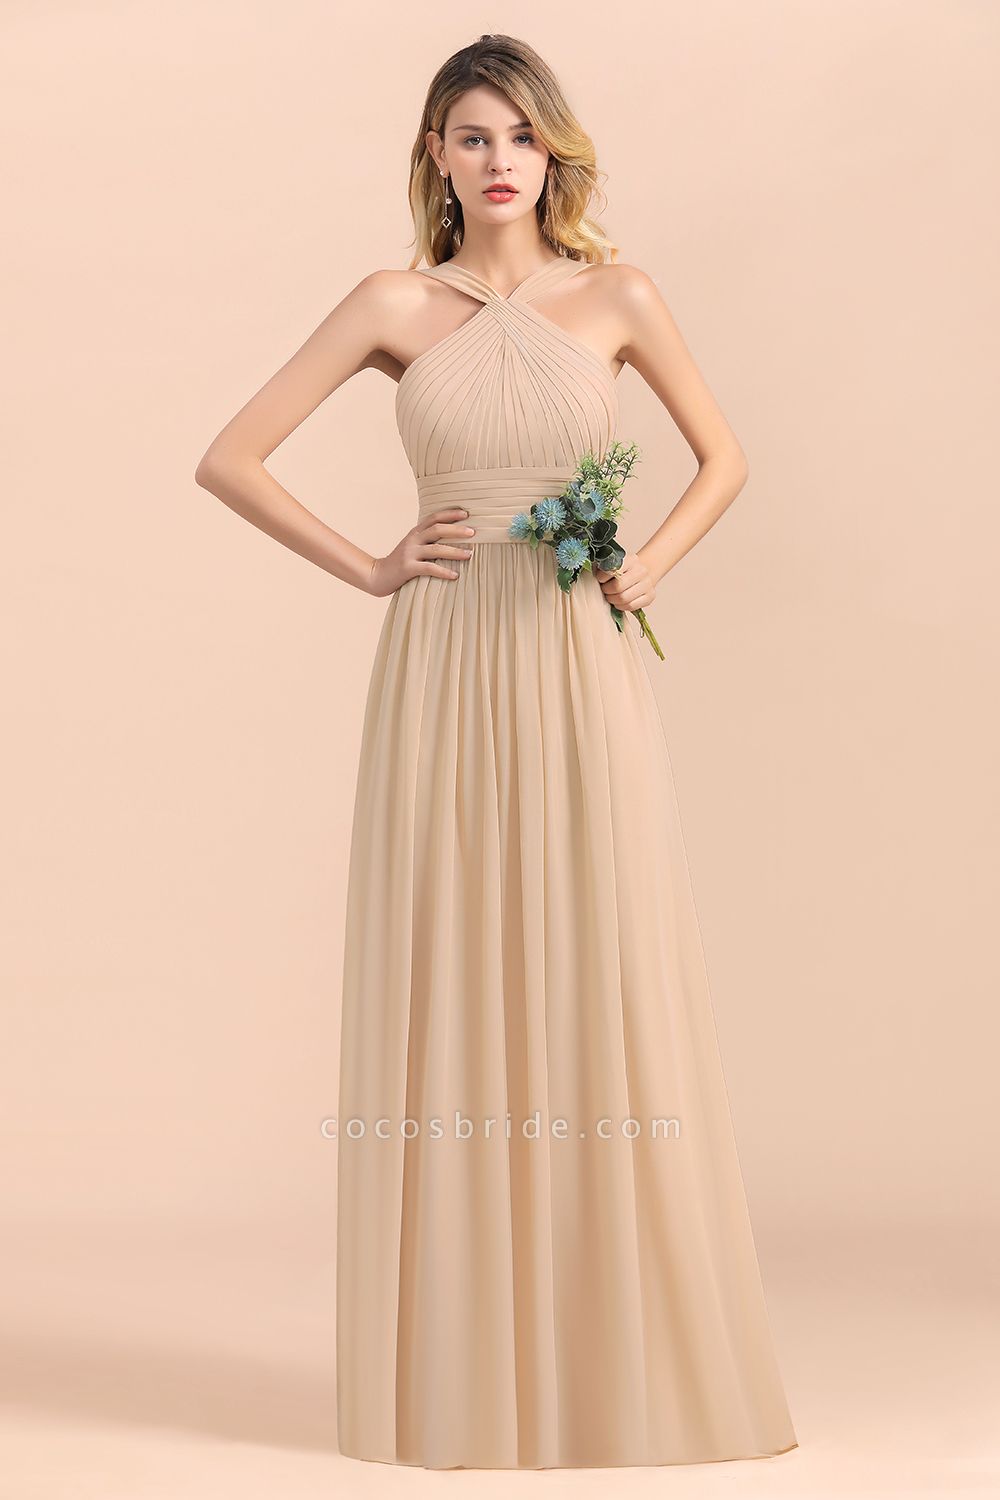 A-Line Sleeveless Soft Chiffon Backless Floor-length Bridesmaid Dress With Ruched